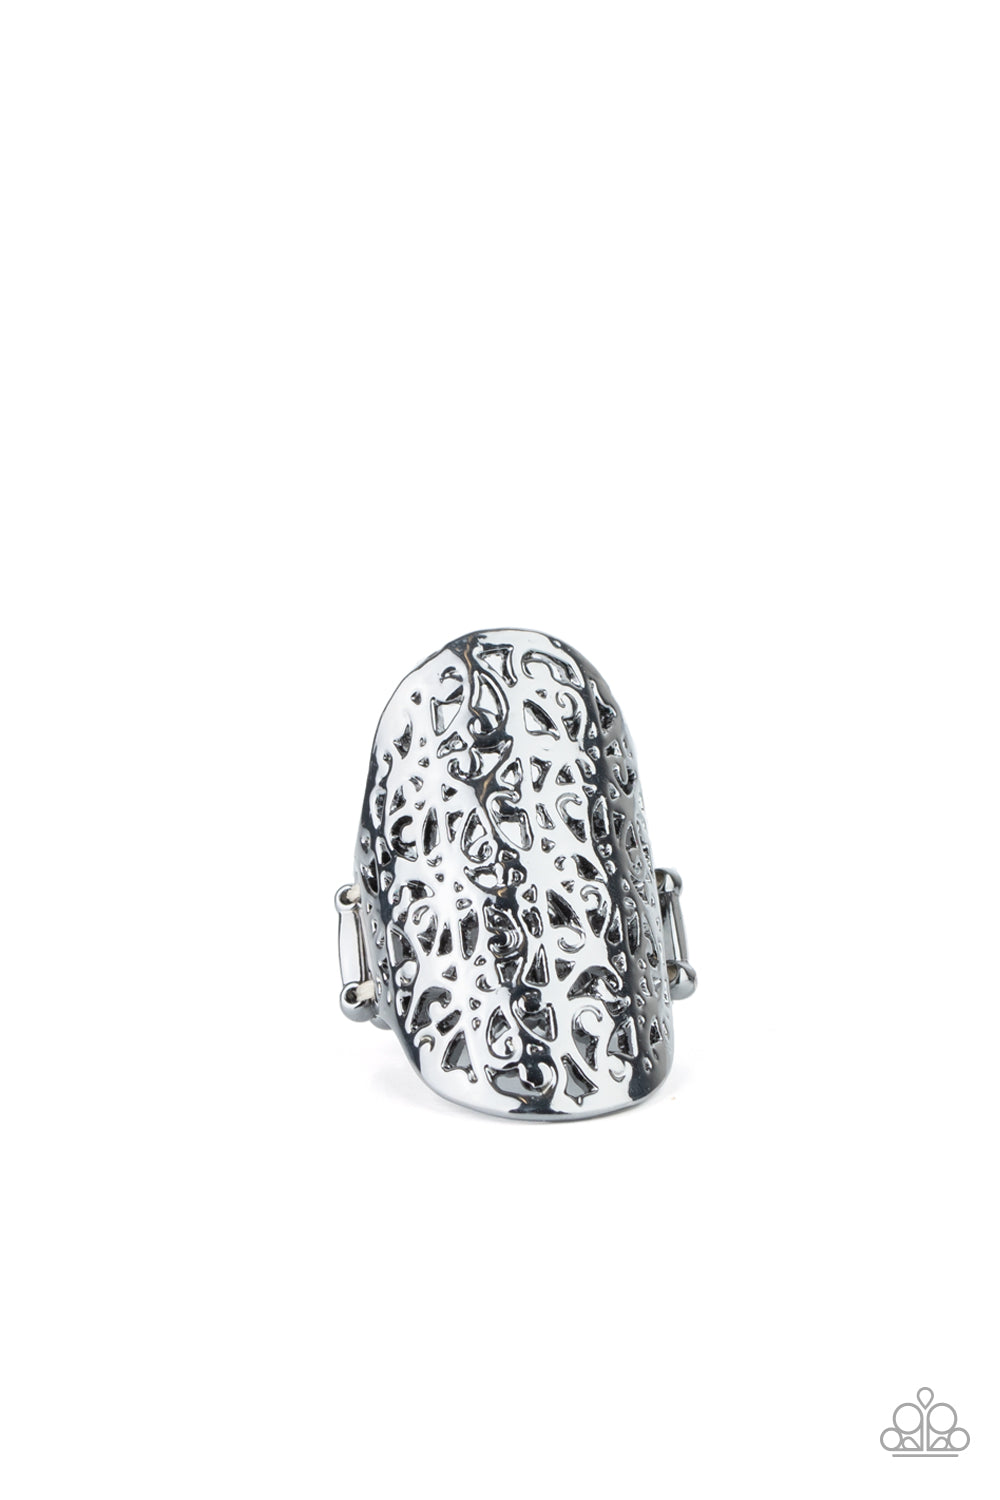 Stenciled in airy filigree patterns, a shiny gunmetal oval delicately folds around the finger for a seasonal inspired finish. Features a stretchy band for a flexible fit.